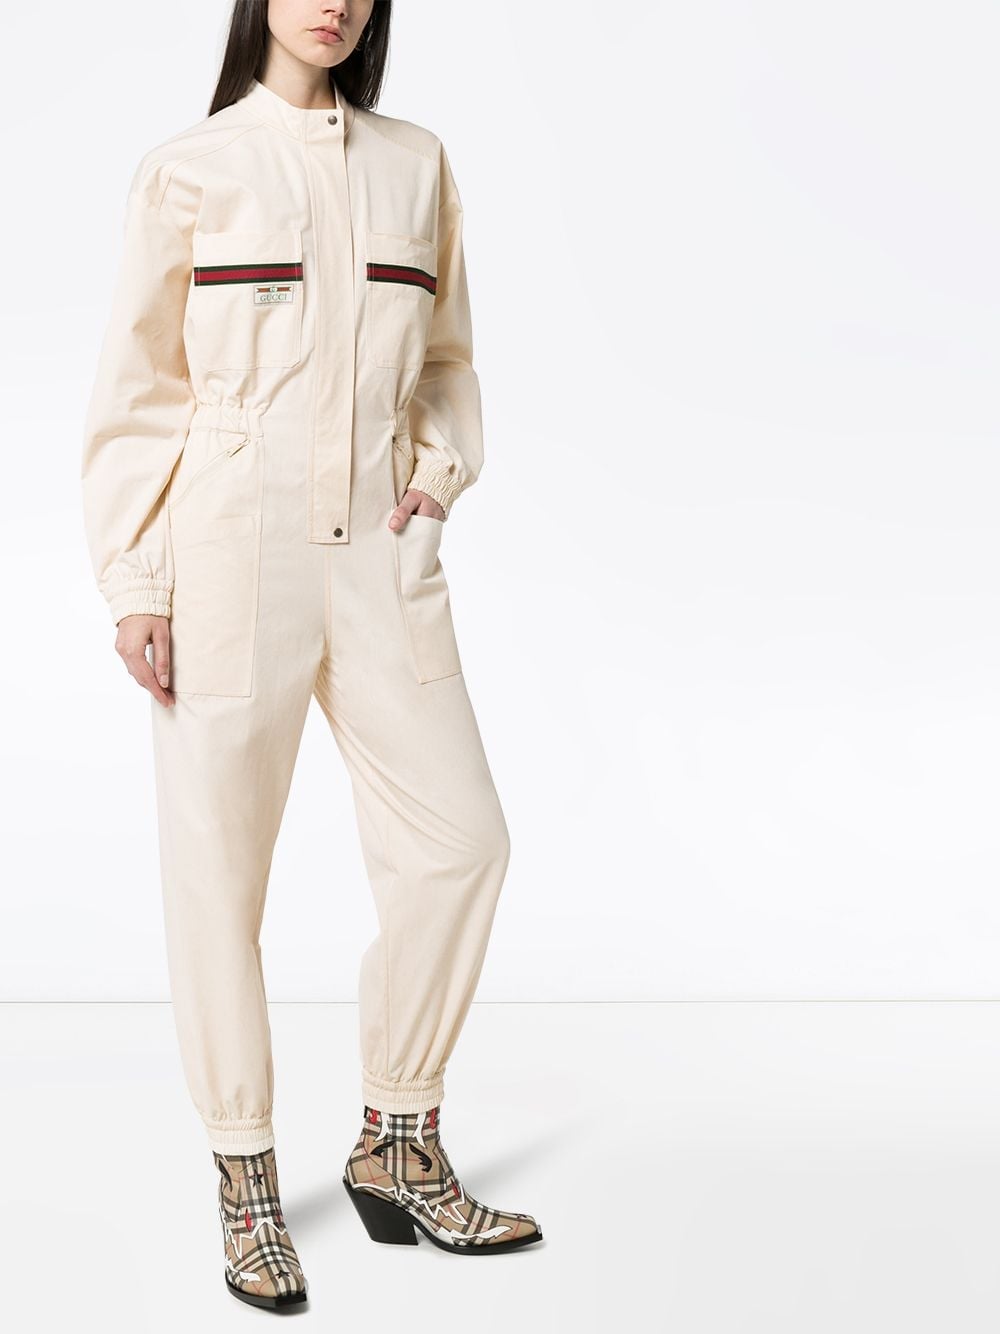 Discover 72+ gucci jumpsuit womens